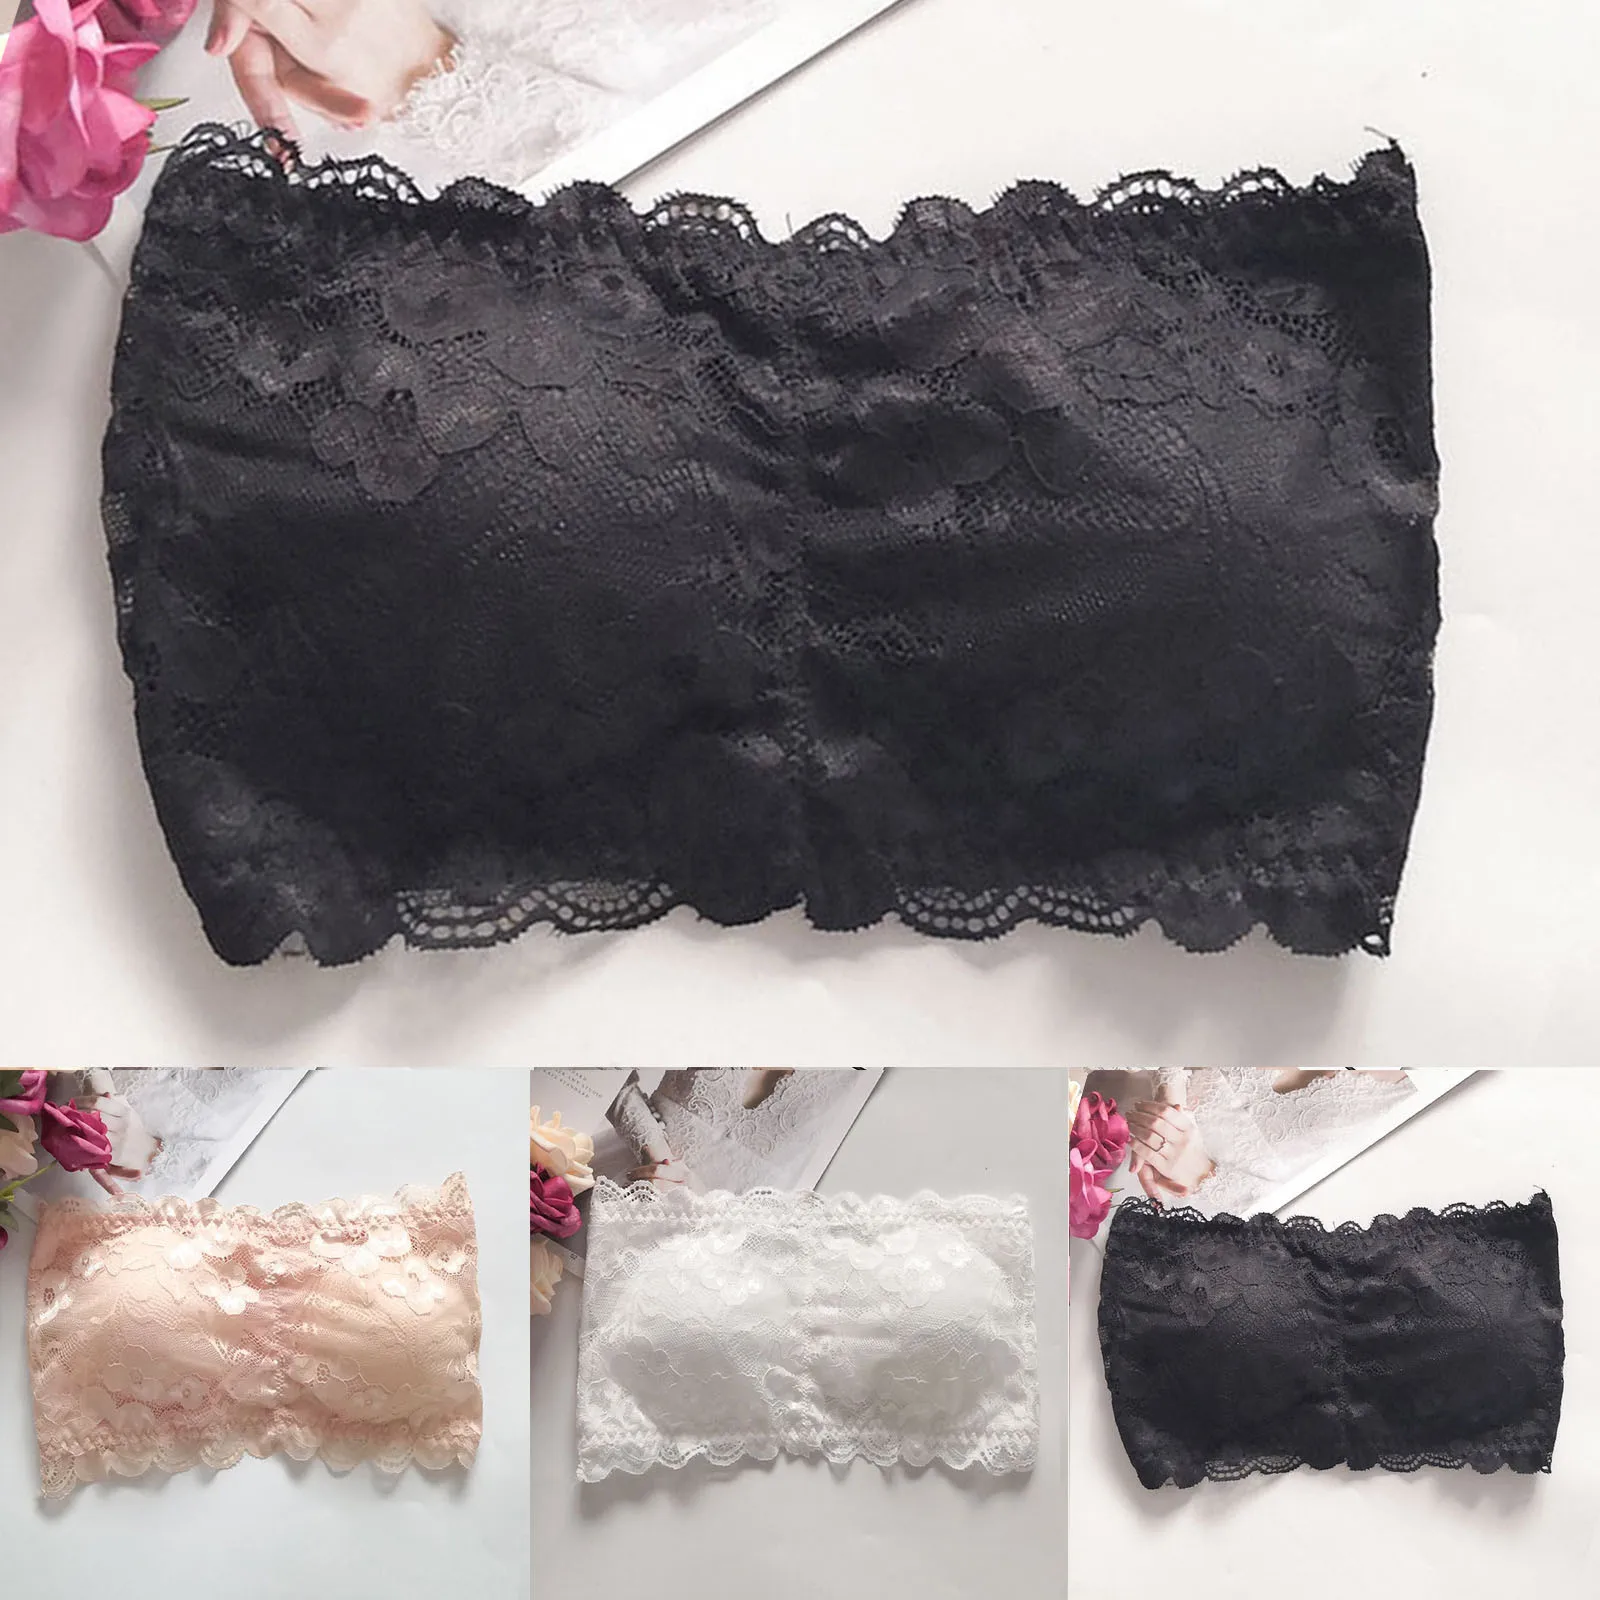 Strapless Bra For Women Sexy Lace Lingerie Wrapped Chest Seamless Invisible  Bra Underwear Lace Tank Top Lace Large Size Bra, Beyondshoping